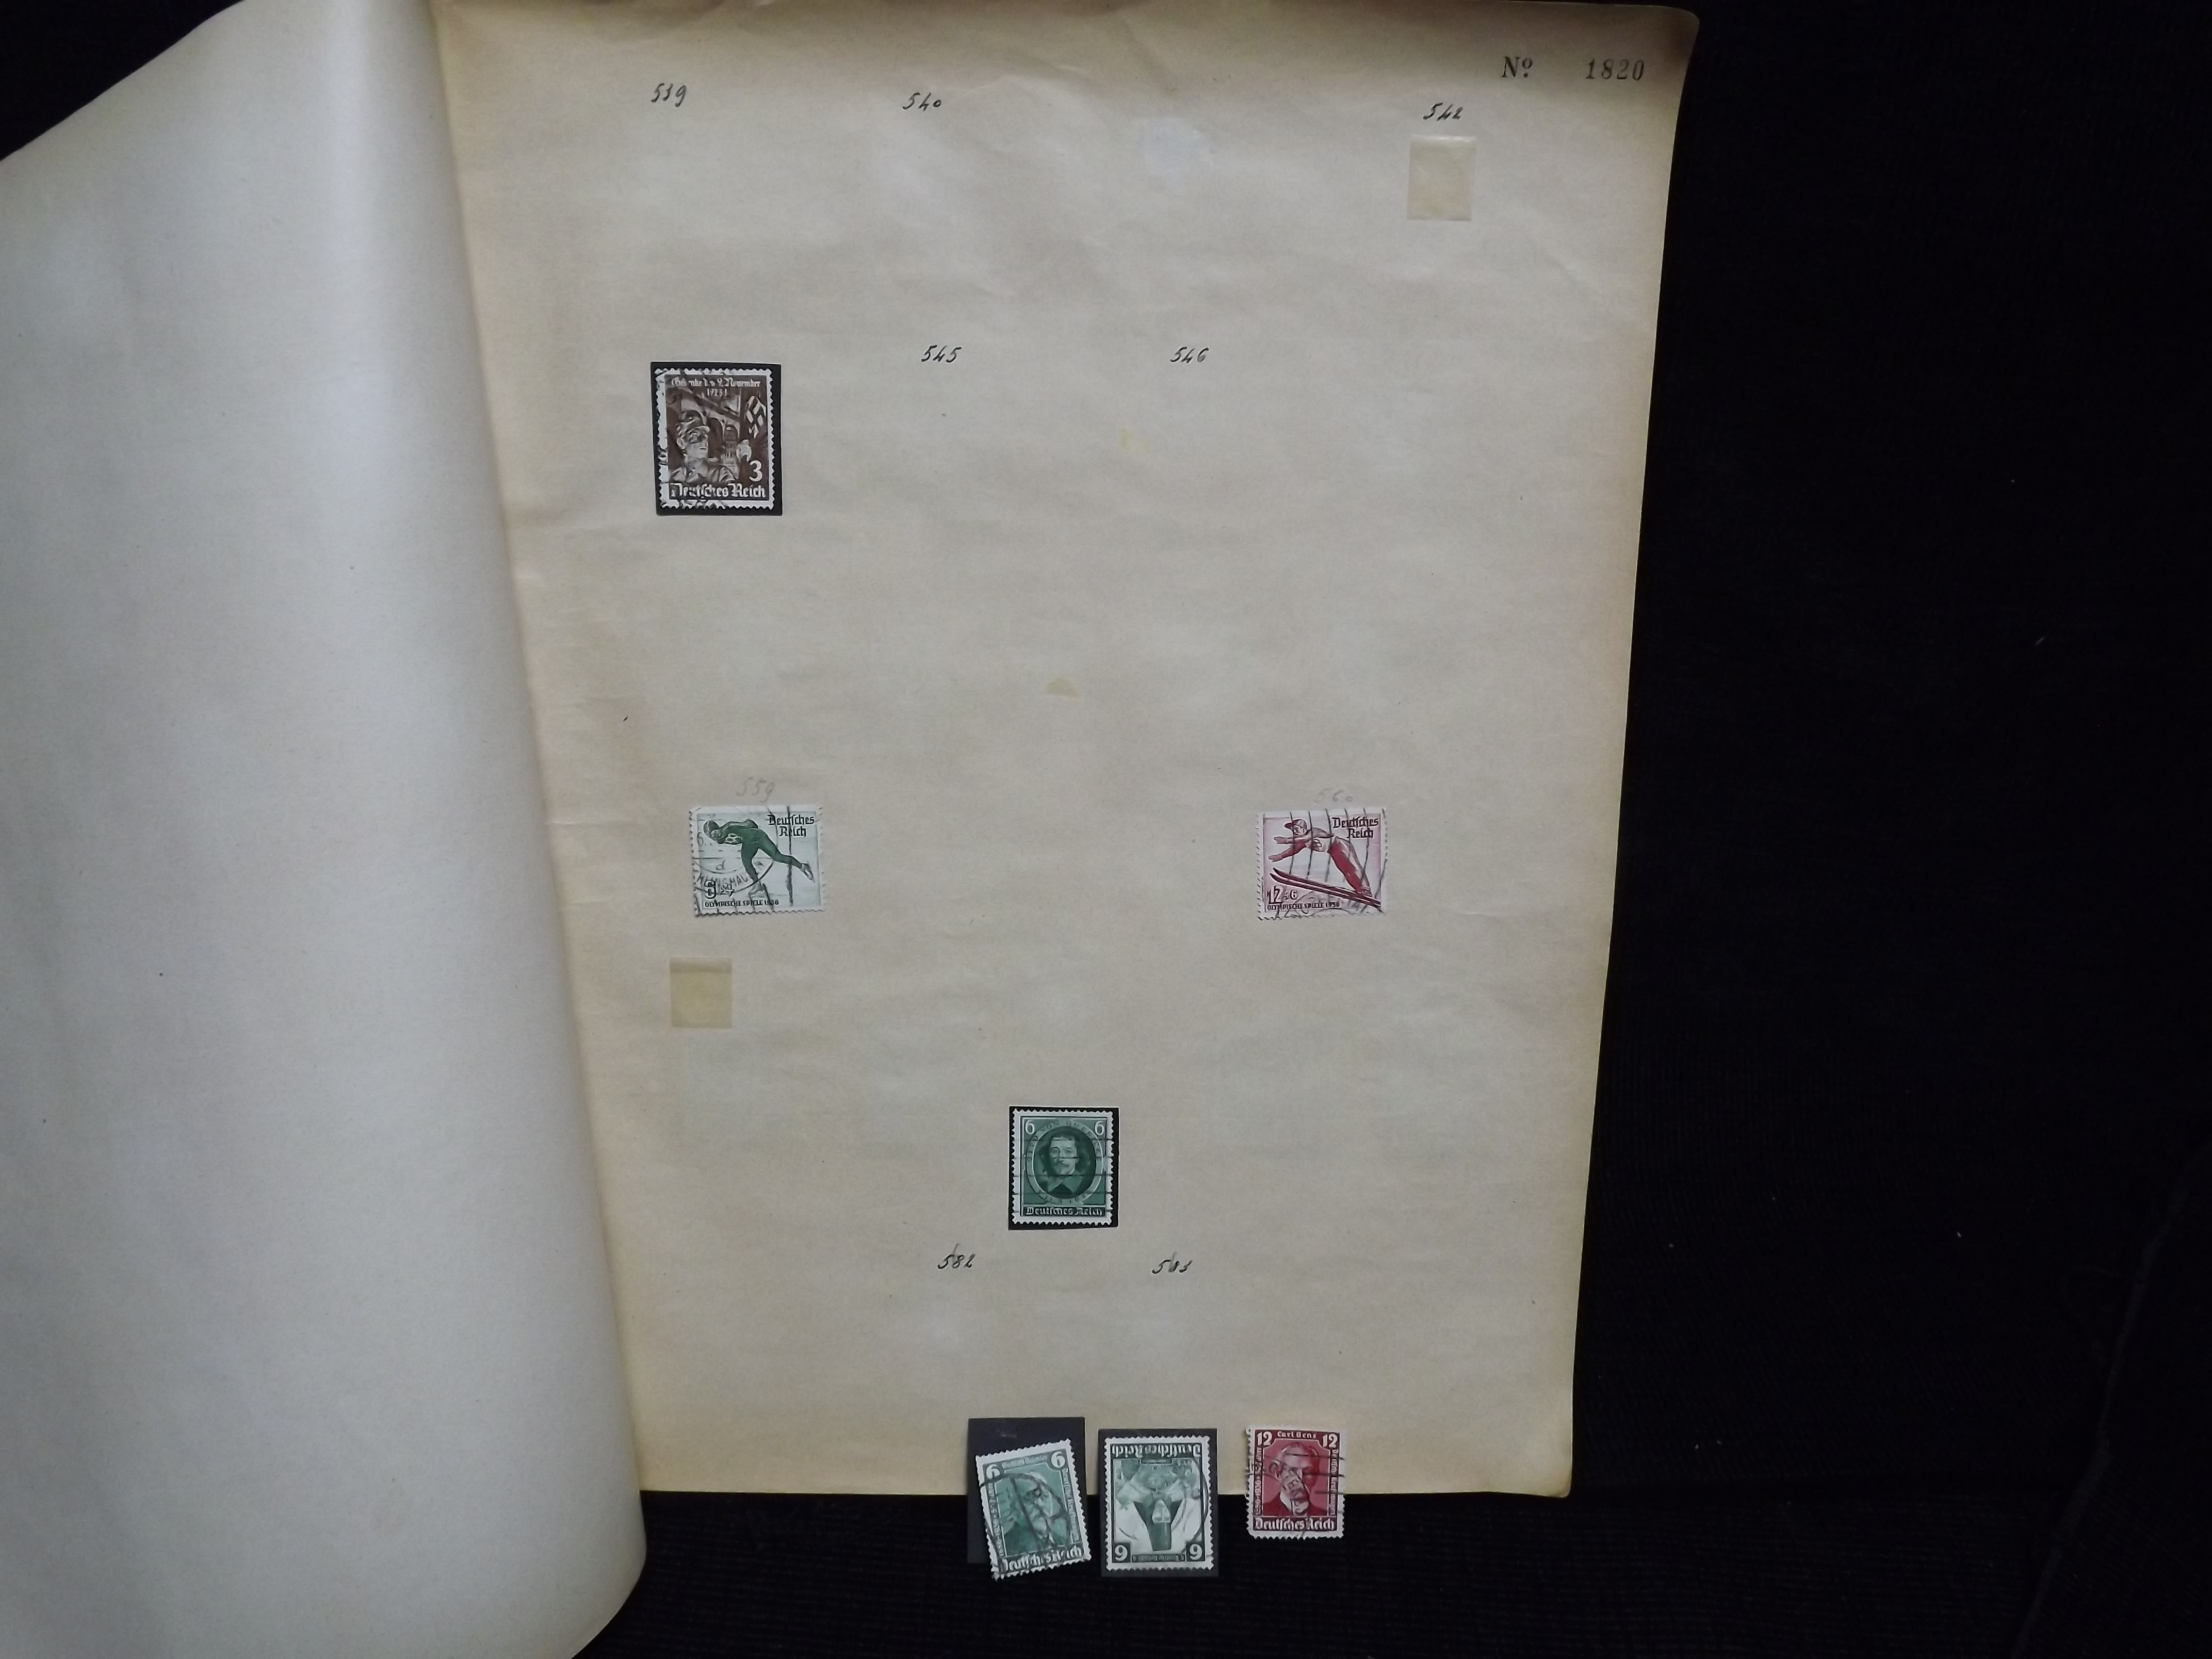 Over 500 x German Used & Mint Postage Stamps. Housed in old ledger page Album. Includes various - Image 15 of 30